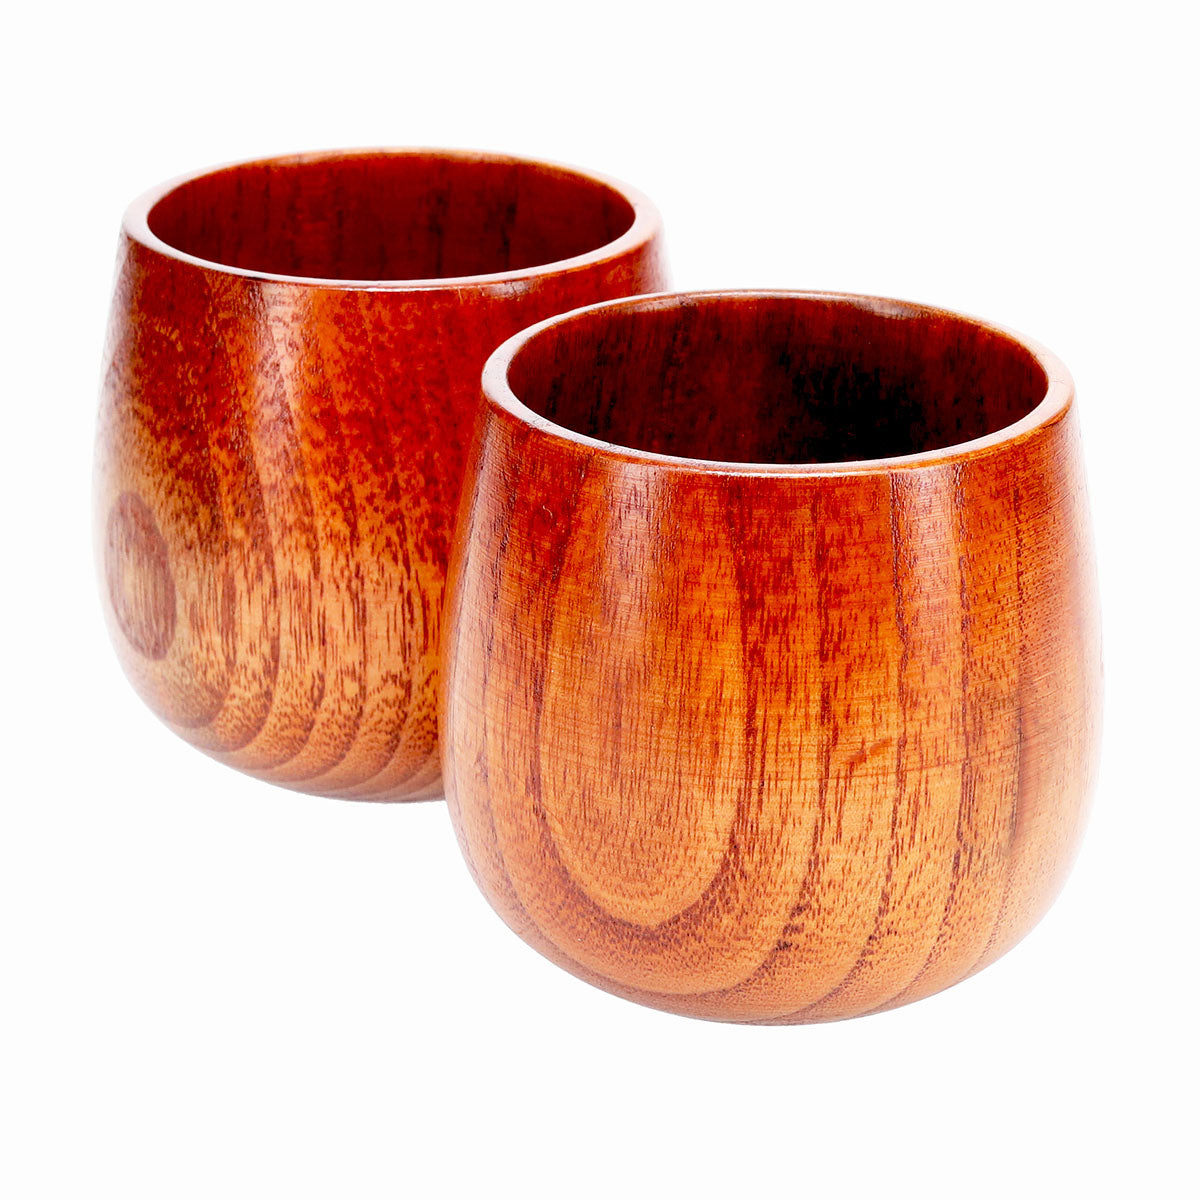 Two beechwood cups with a smooth, polished surface and a rich, reddish-brown color. The 2 Piece Japanese Style Small Wooden Cup by TM has a rounded, slightly tapered shape and an open top. They are placed side by side against a white background.